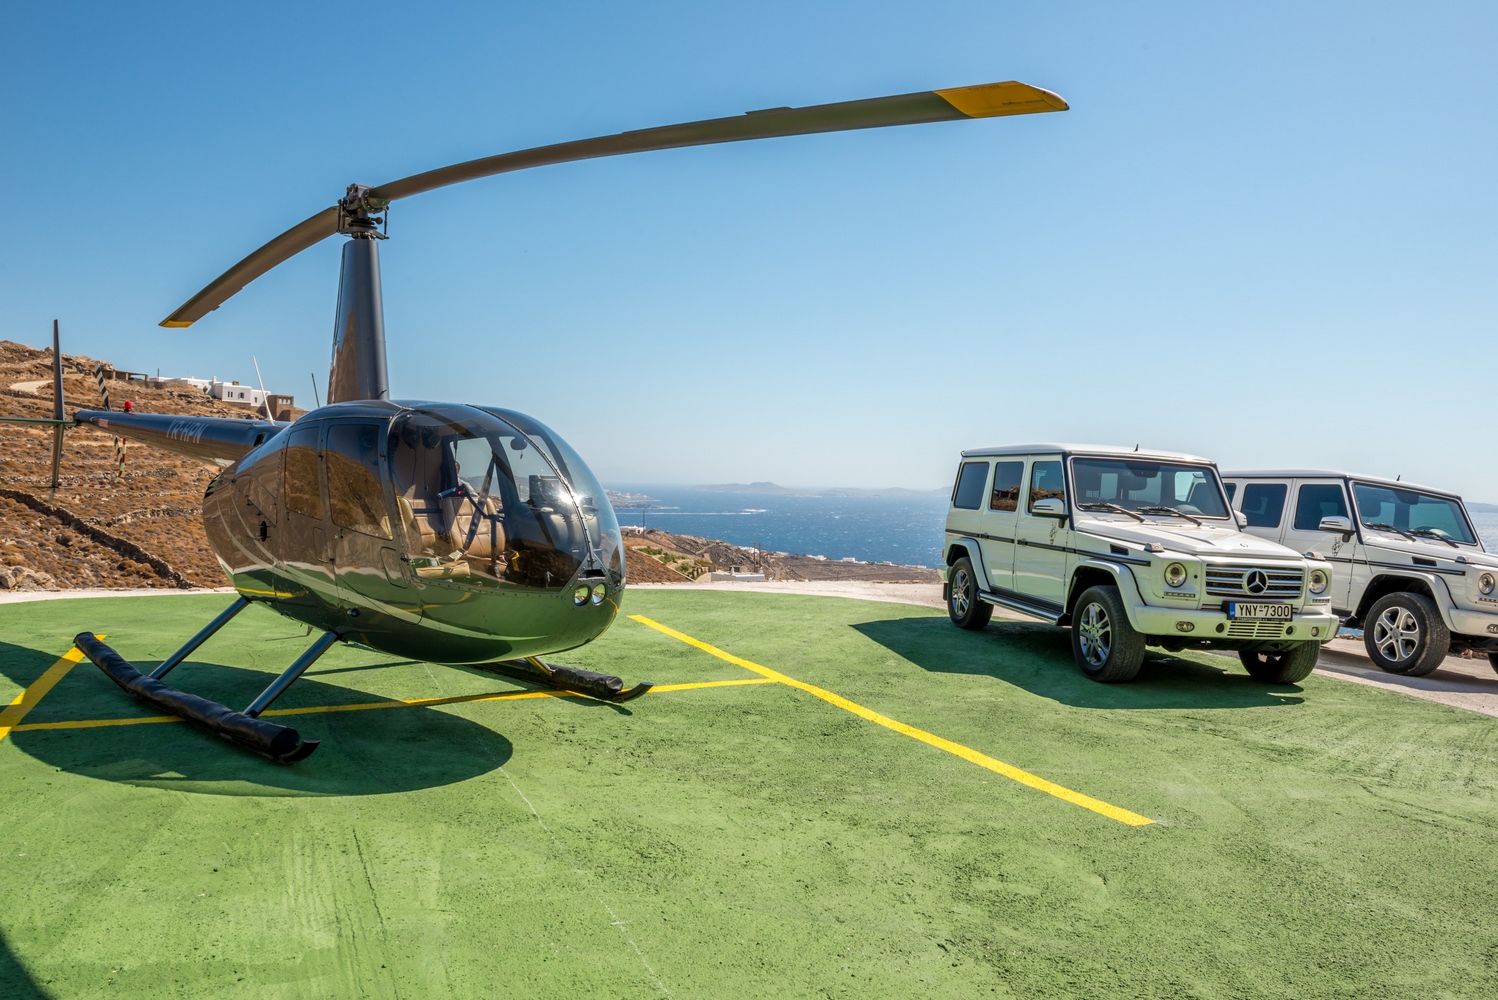 Helicopter on a helipad and two cars 